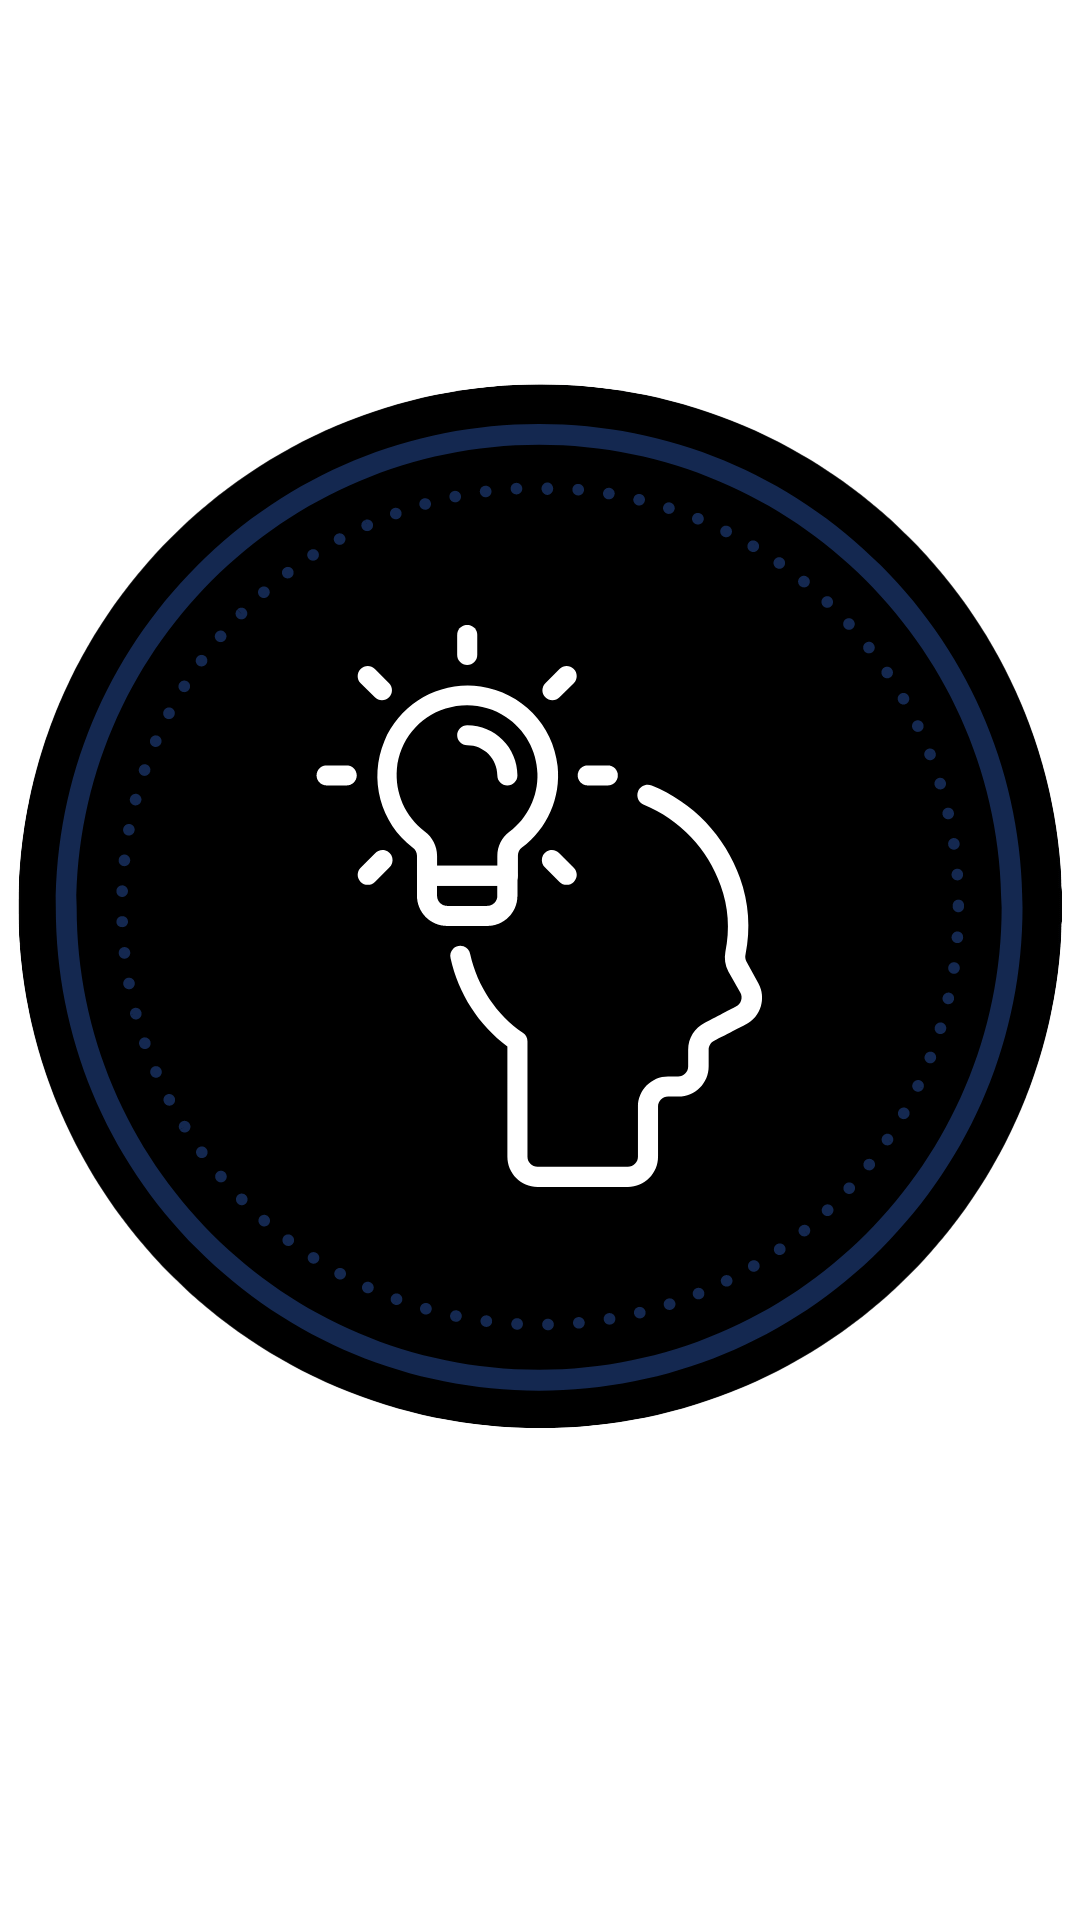 Illustration of an outlined icon of a head with a light bulb symbolizing creativity  and idea generation on a dark background.